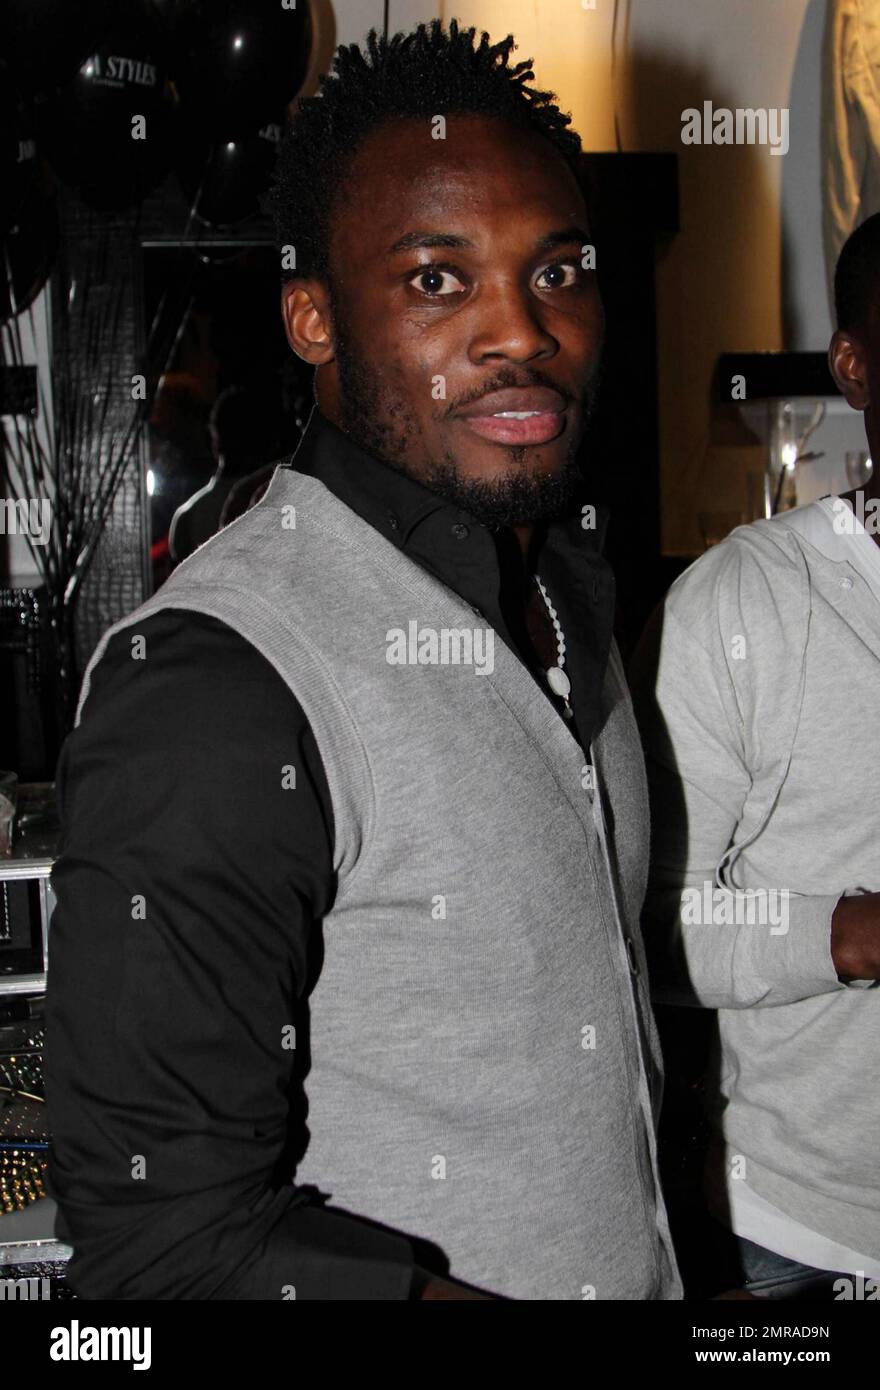 Footballer Michael Essien arrives to the Jada Styles launch party.  Jada Styles is a London-based image consulting, styling and personal online shopping hub for a select members-only group. London, UK. 05/04/10. Stock Photo